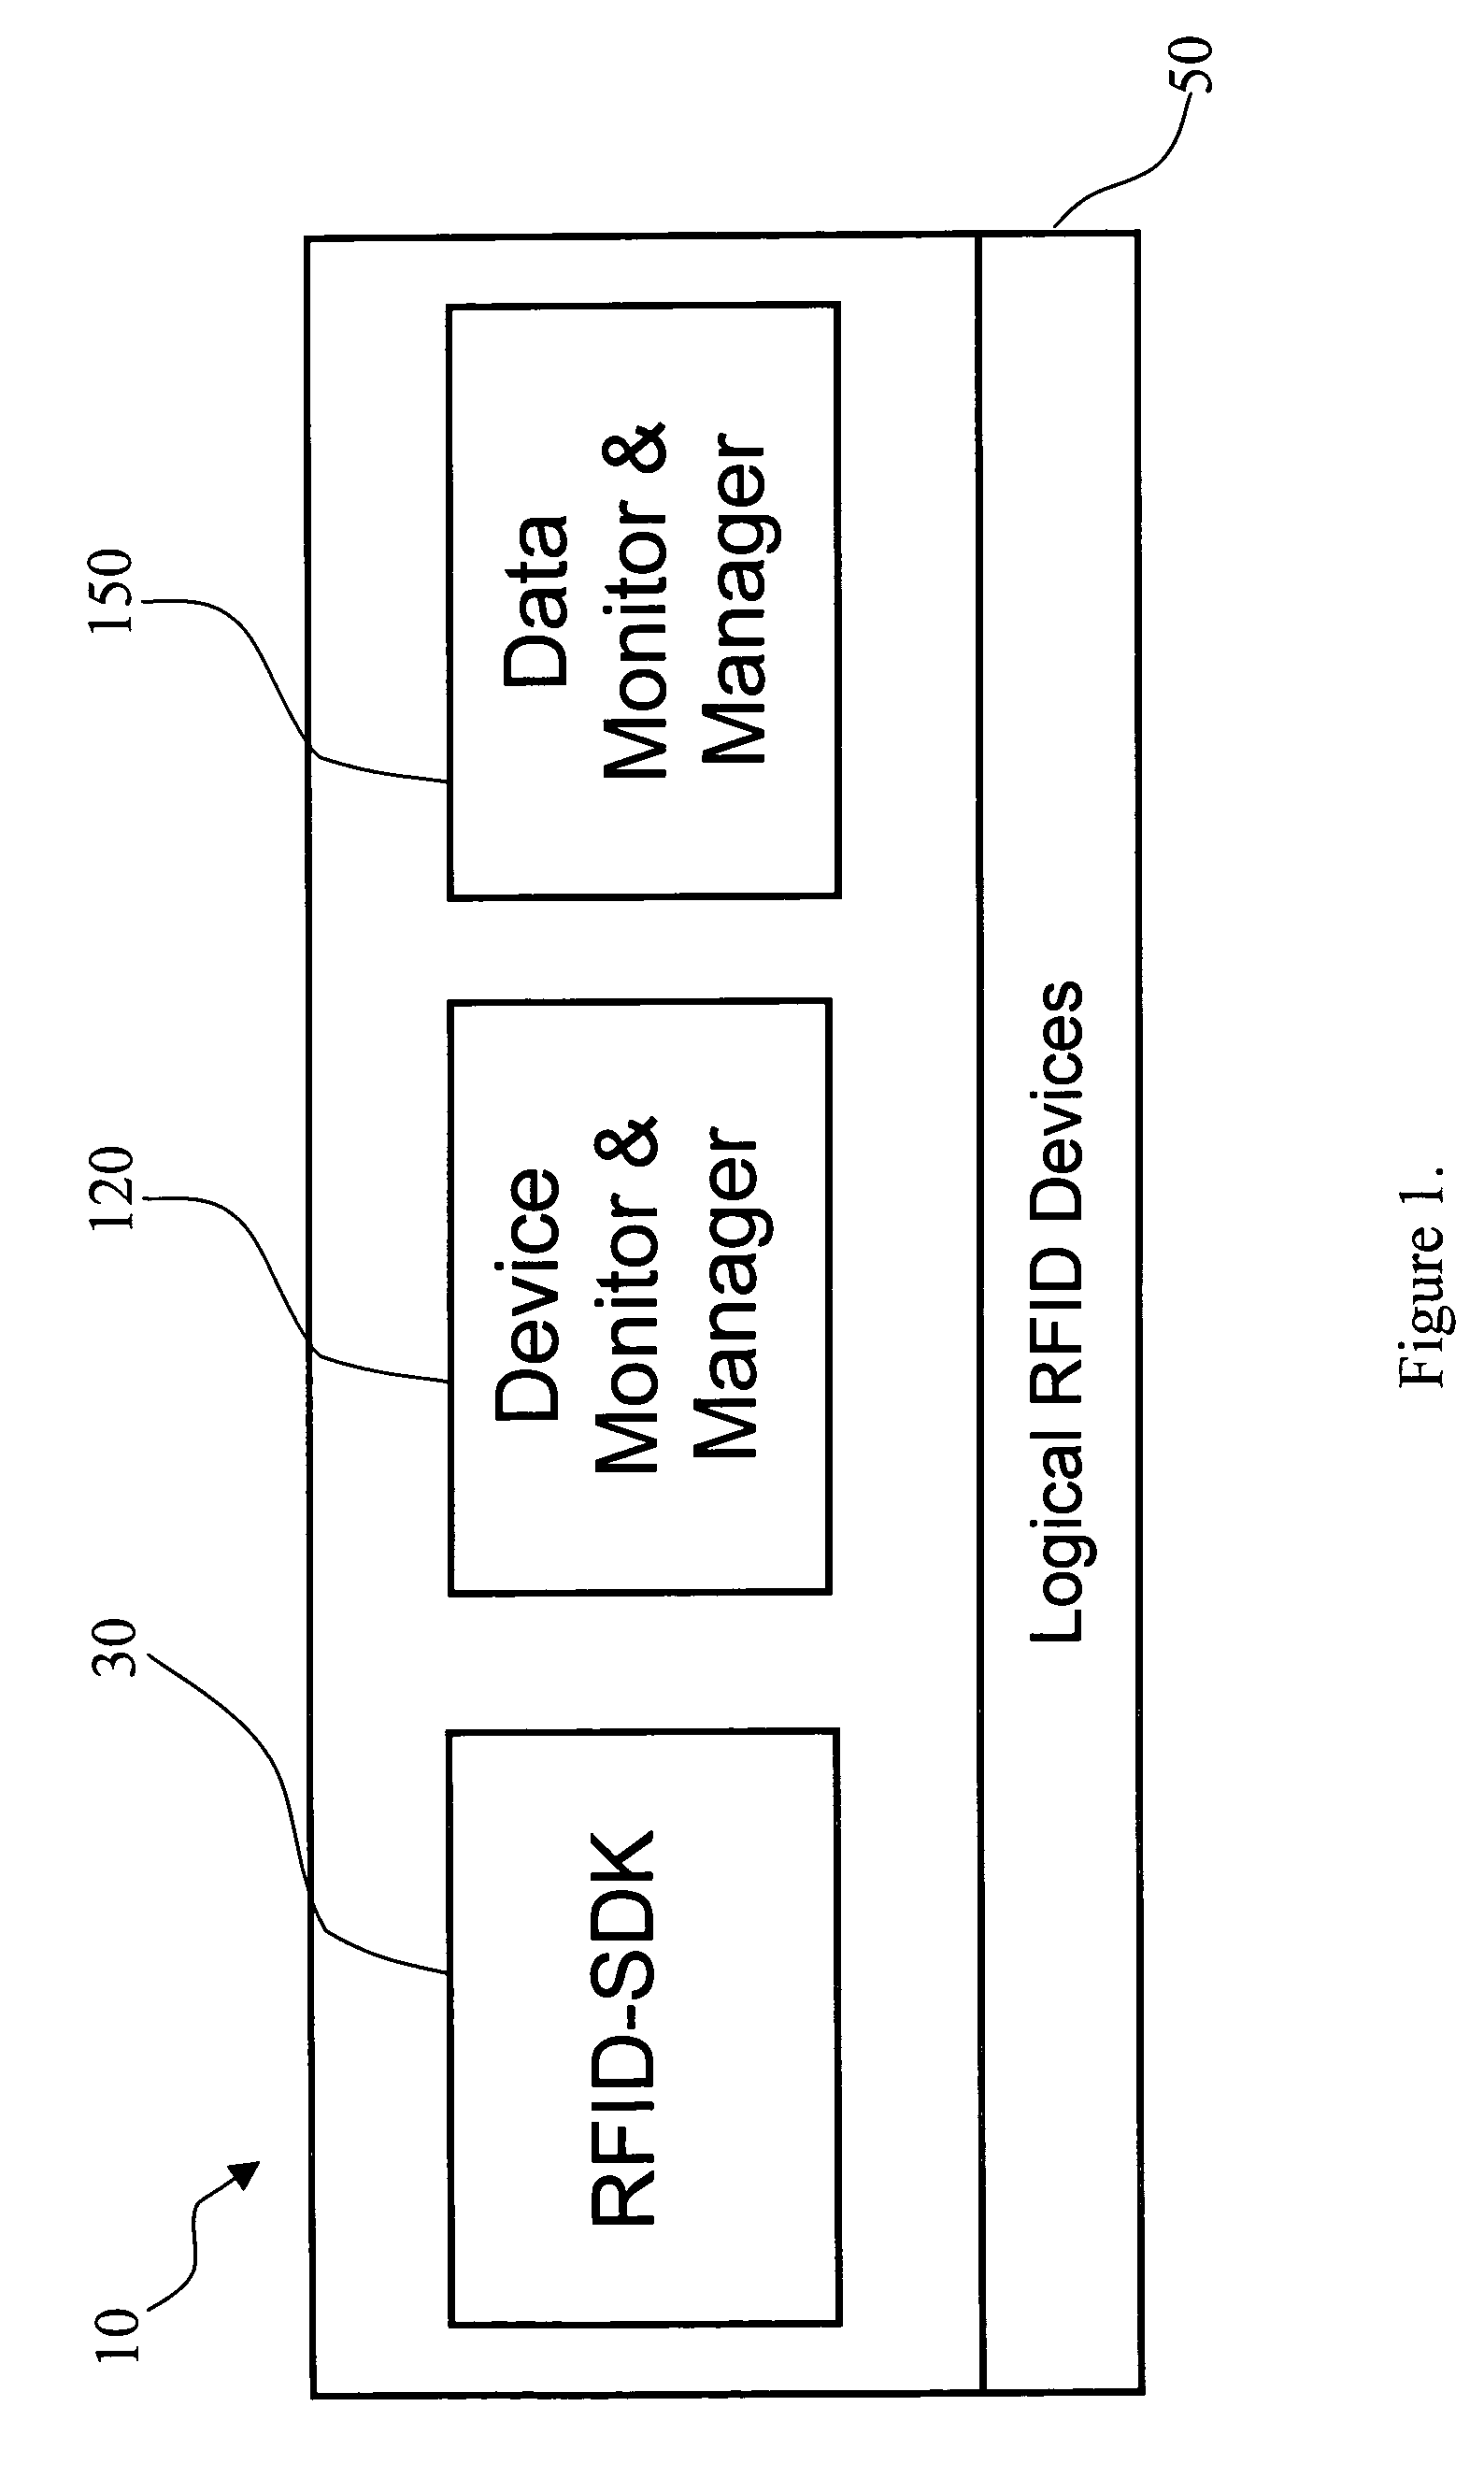 System for developing and deploying radio frequency identification enabled software applications